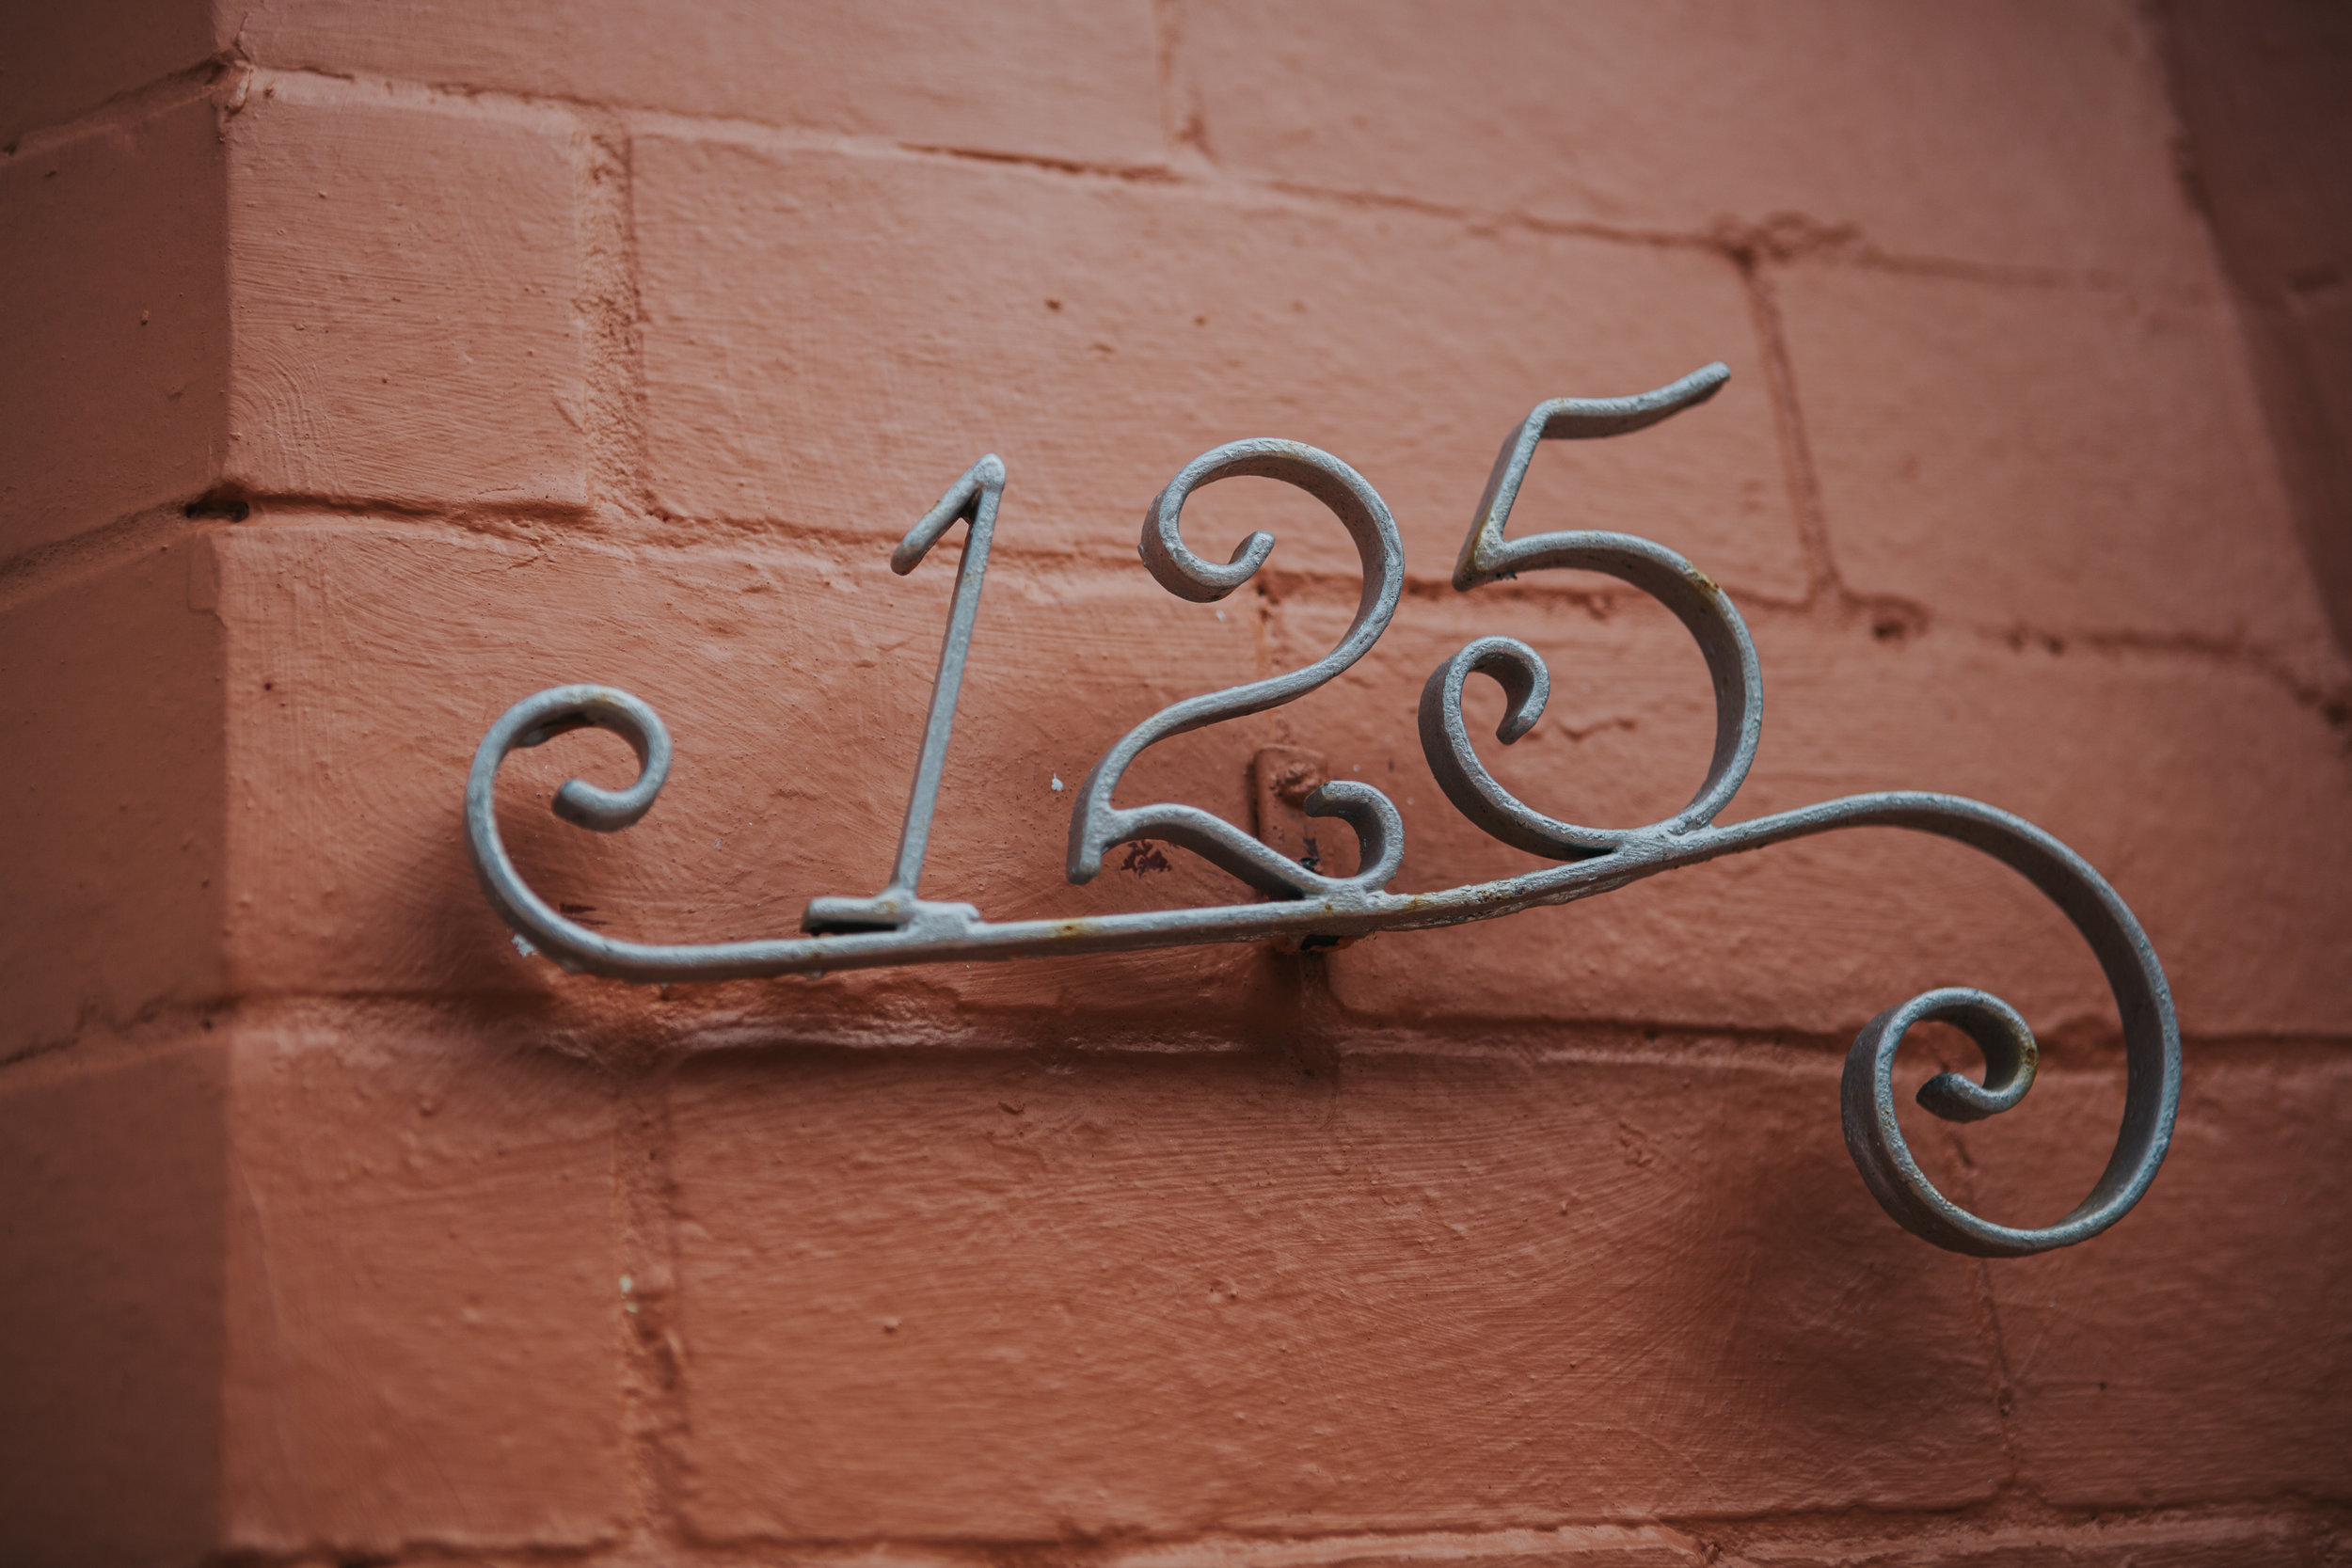 The number 125 of the families house in Liverpool.